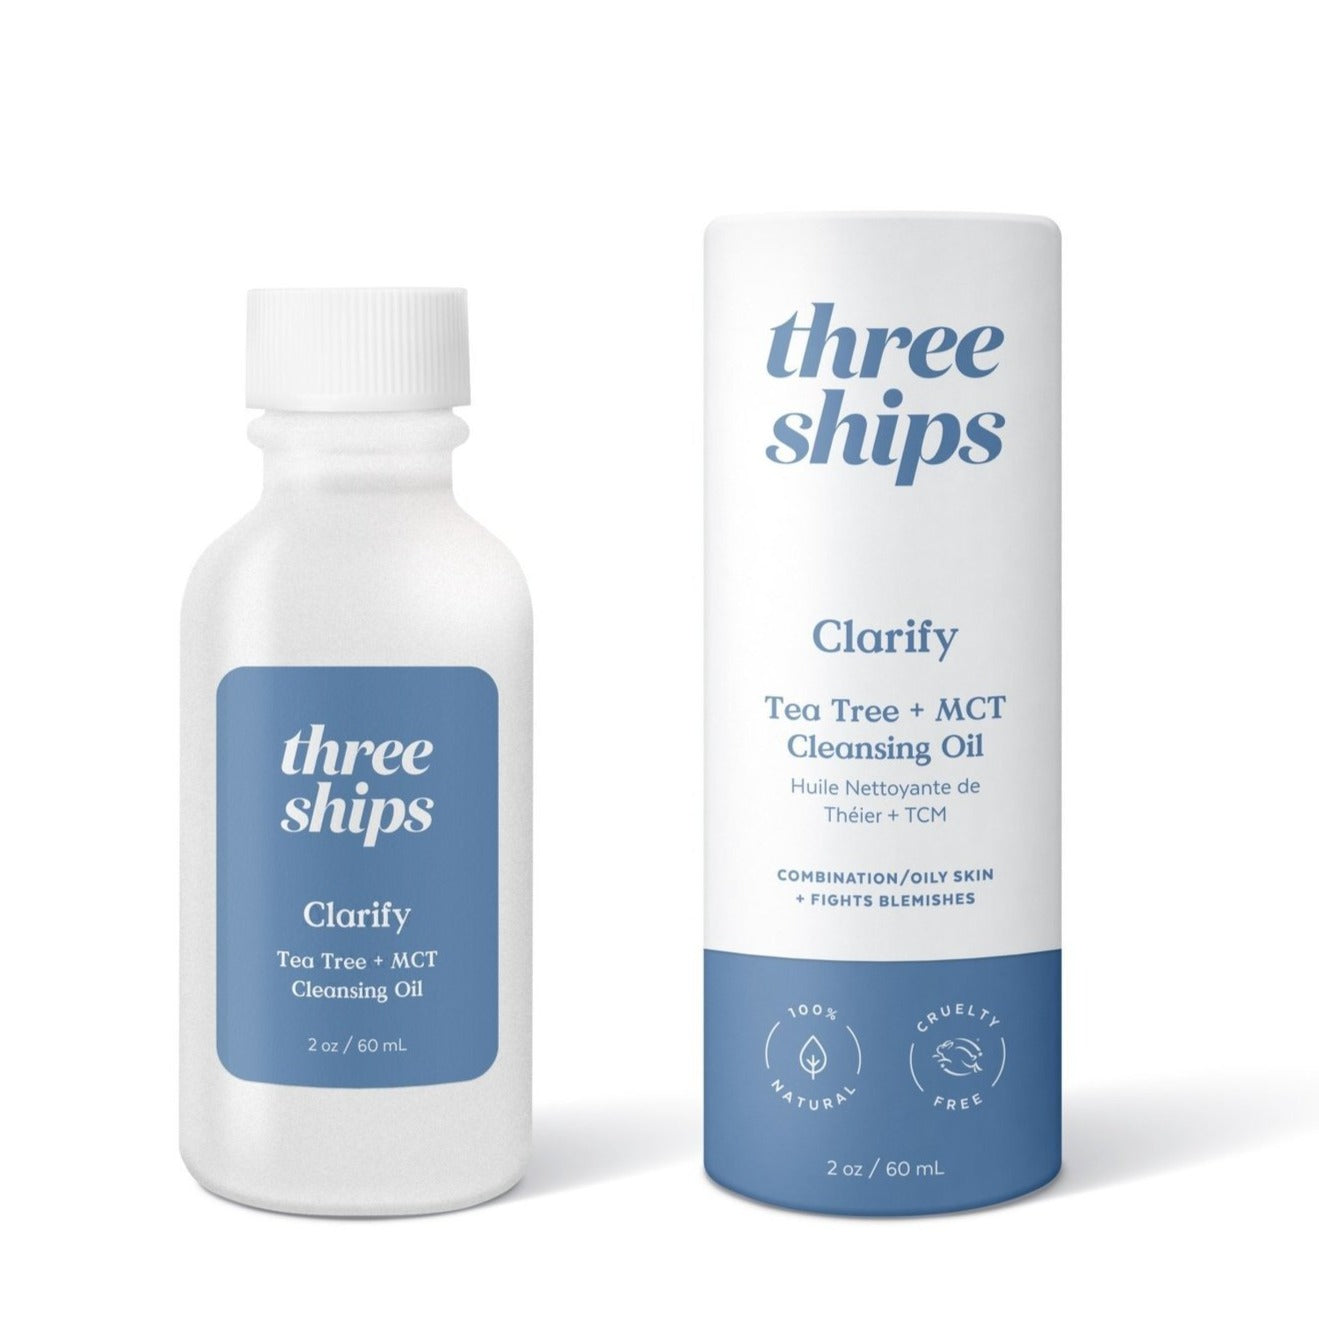 THREE SHIPS - CLARIFY CLEANSING OIL IN TEA TREE + MCT